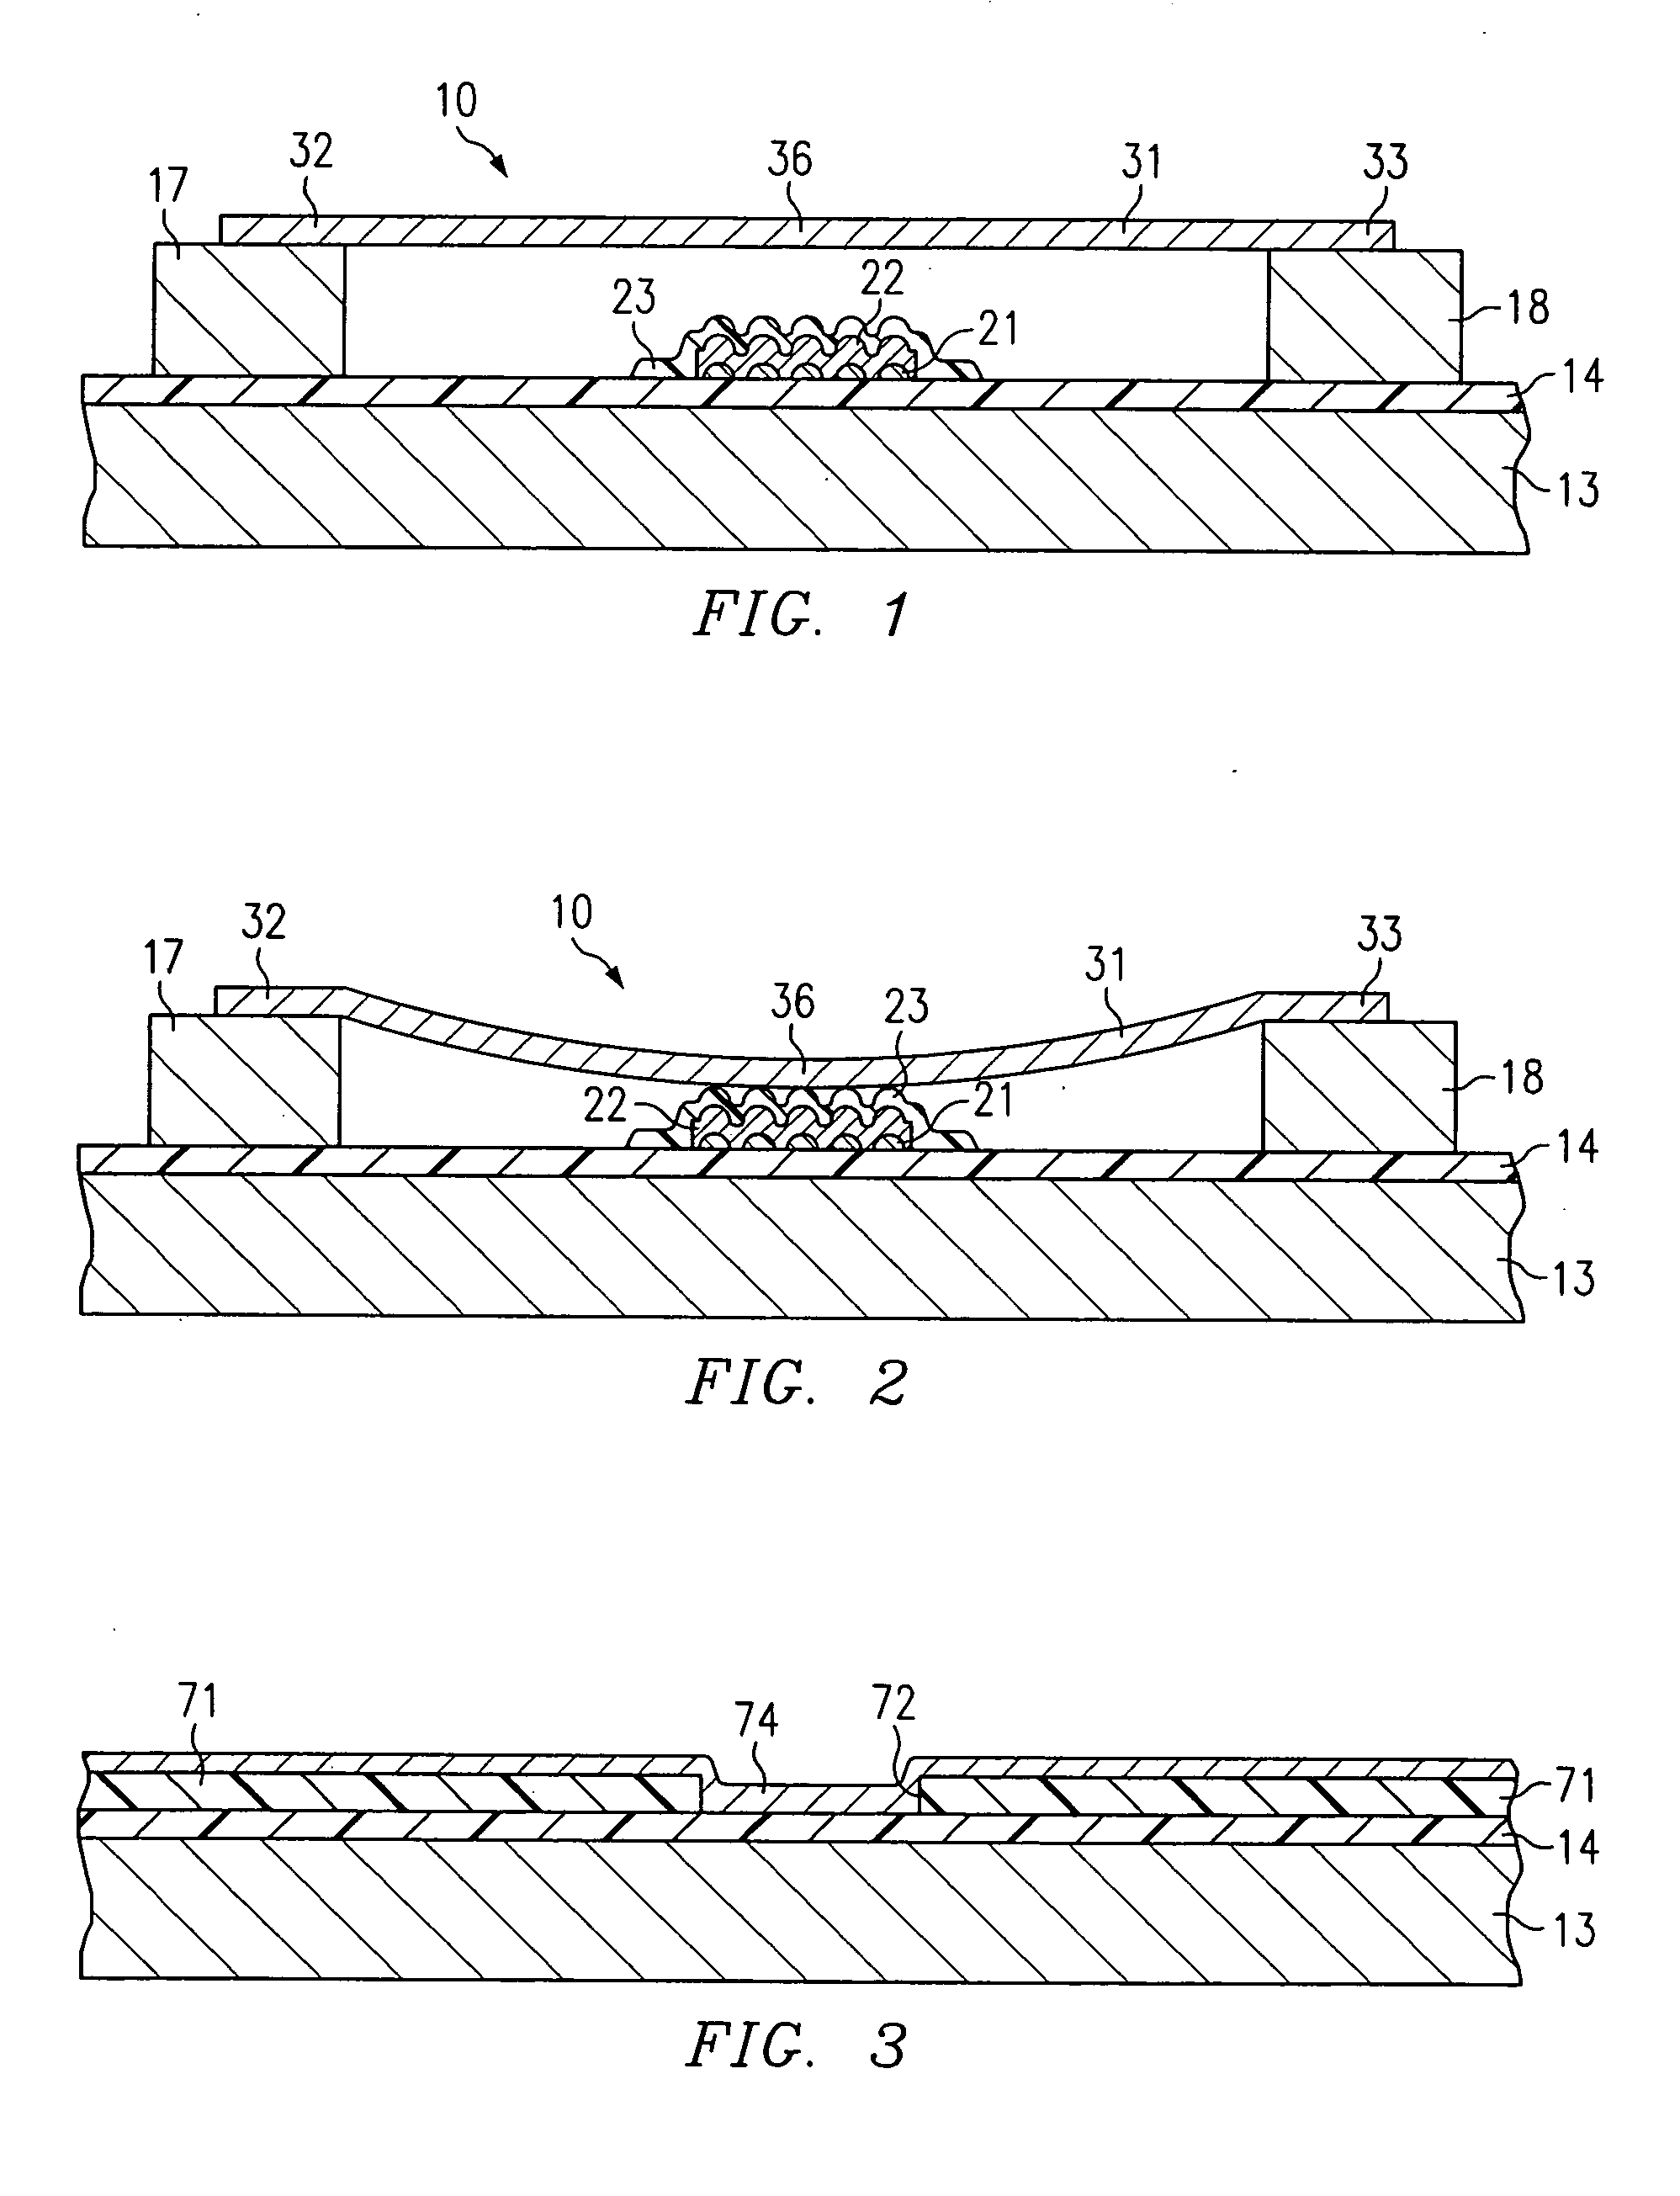 Micro-electro-mechanical switch, and methods of making and using it